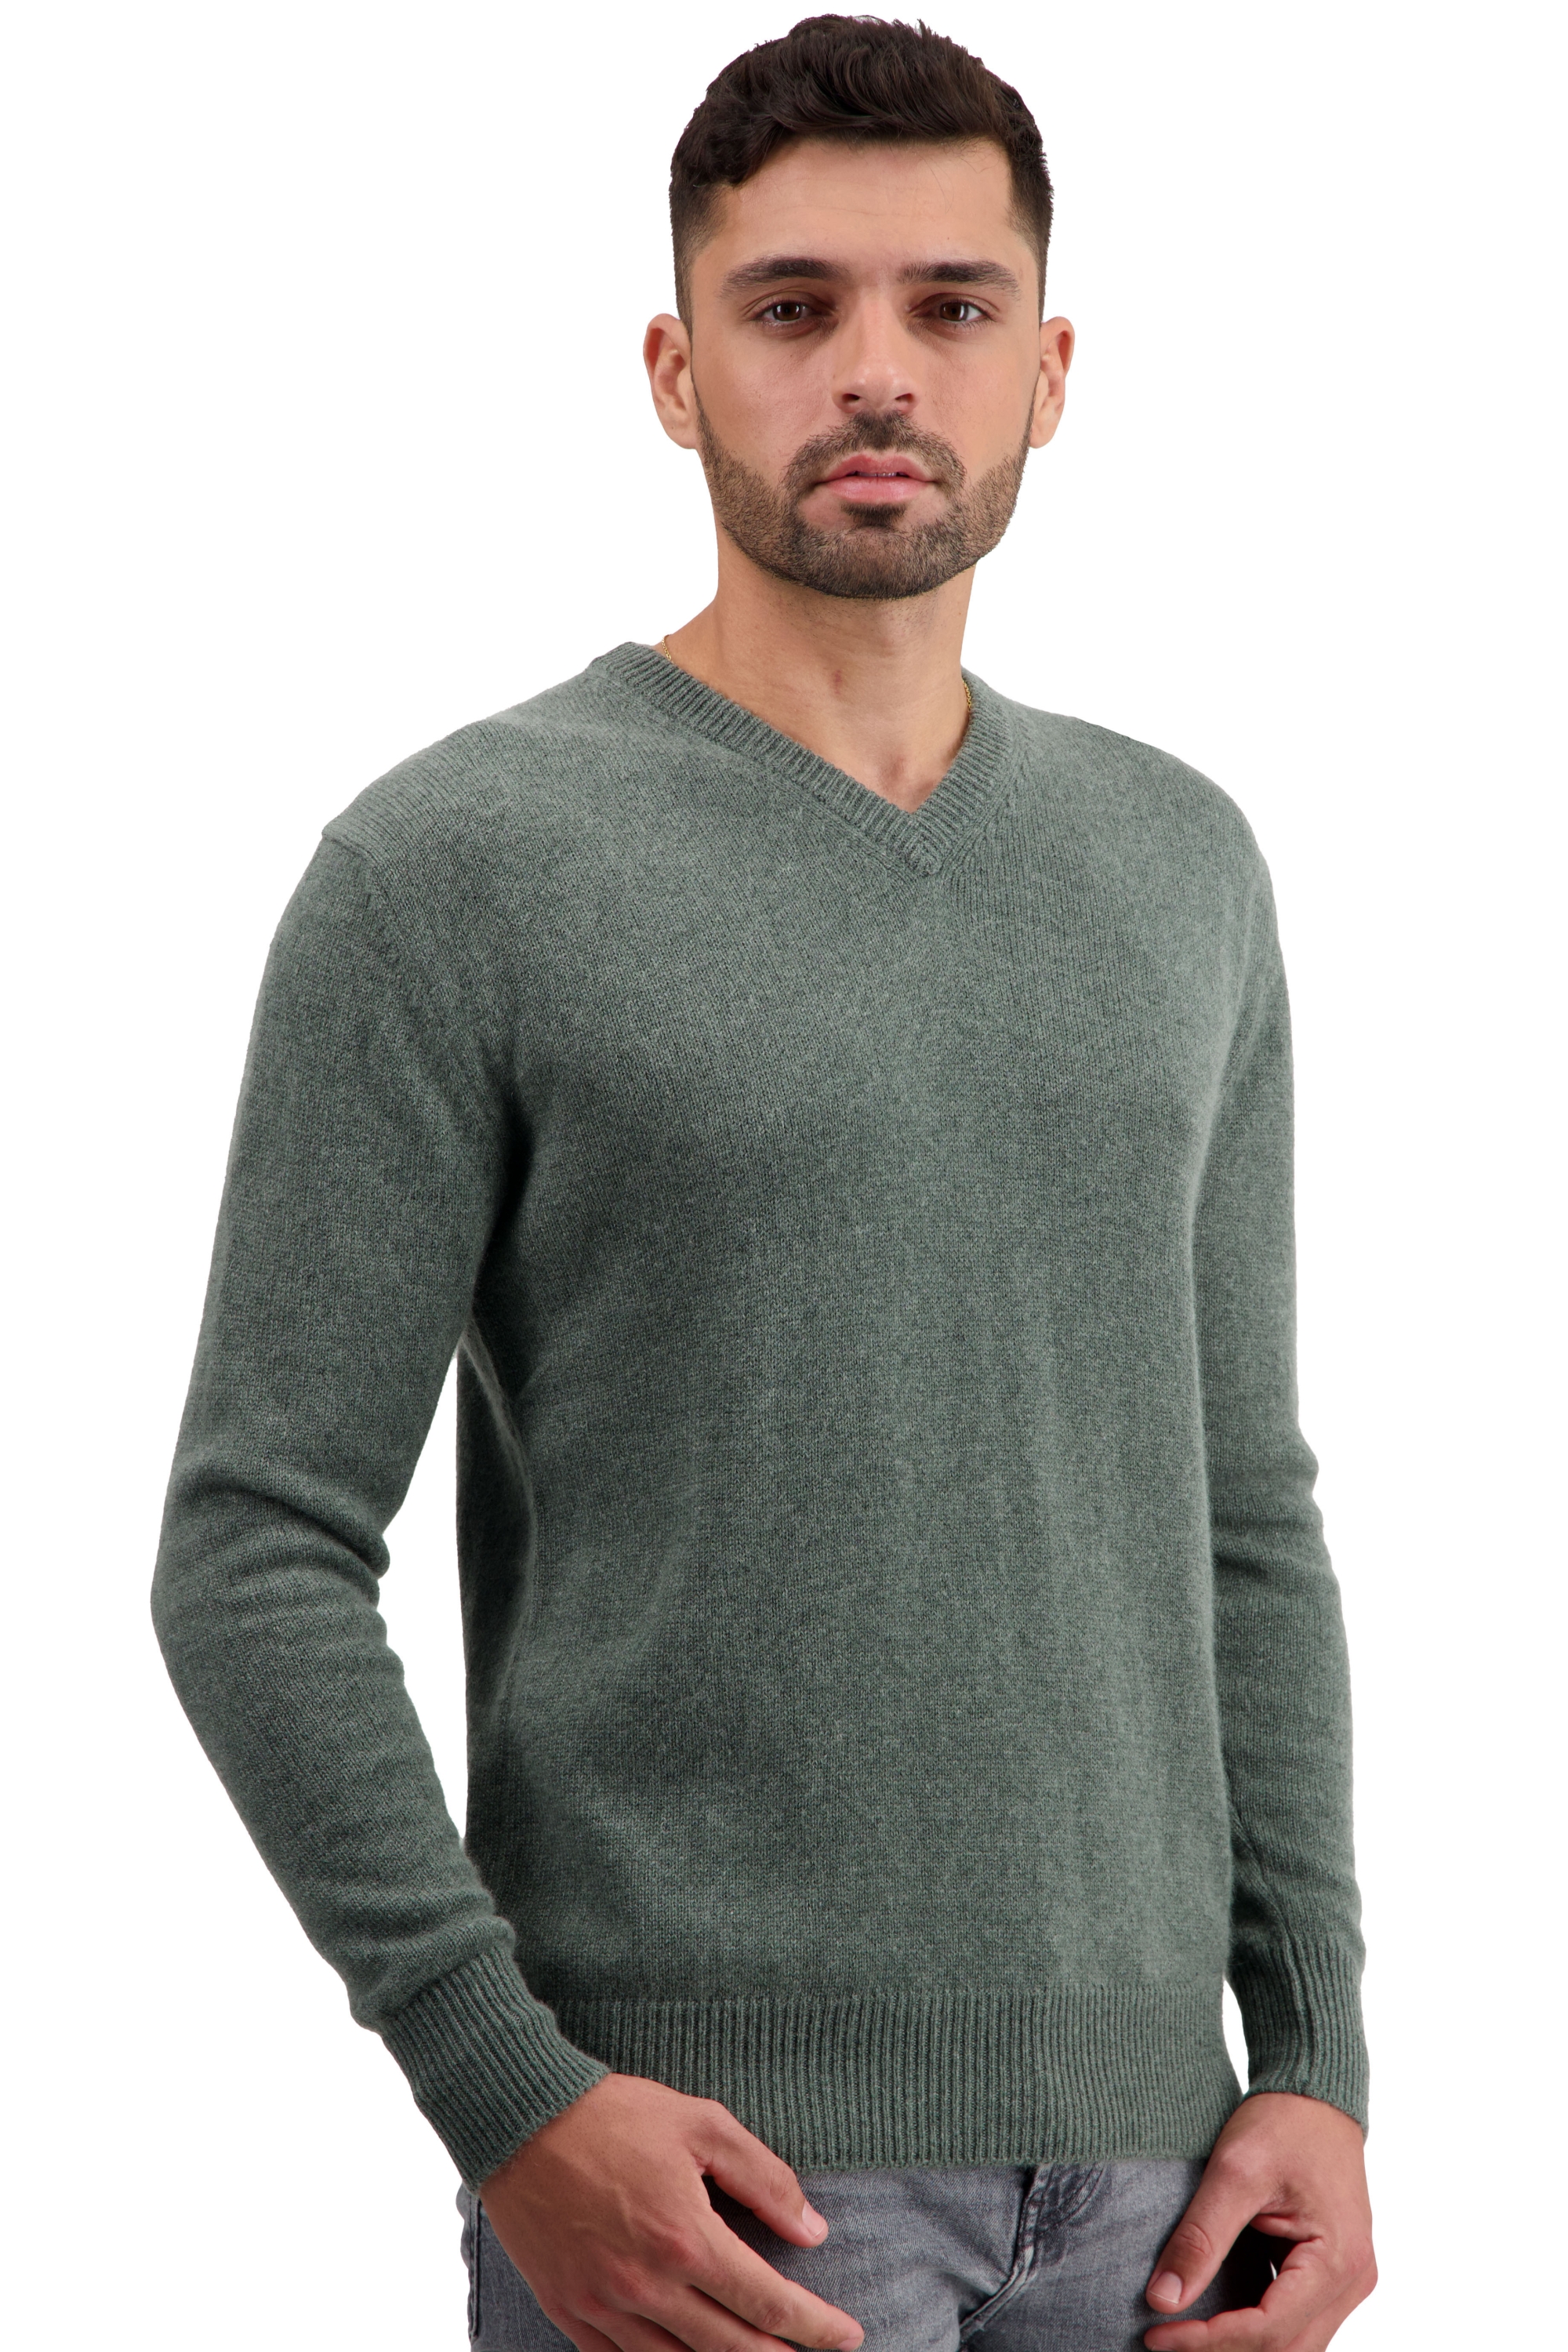 Cachemire pull homme epais tour first military green m